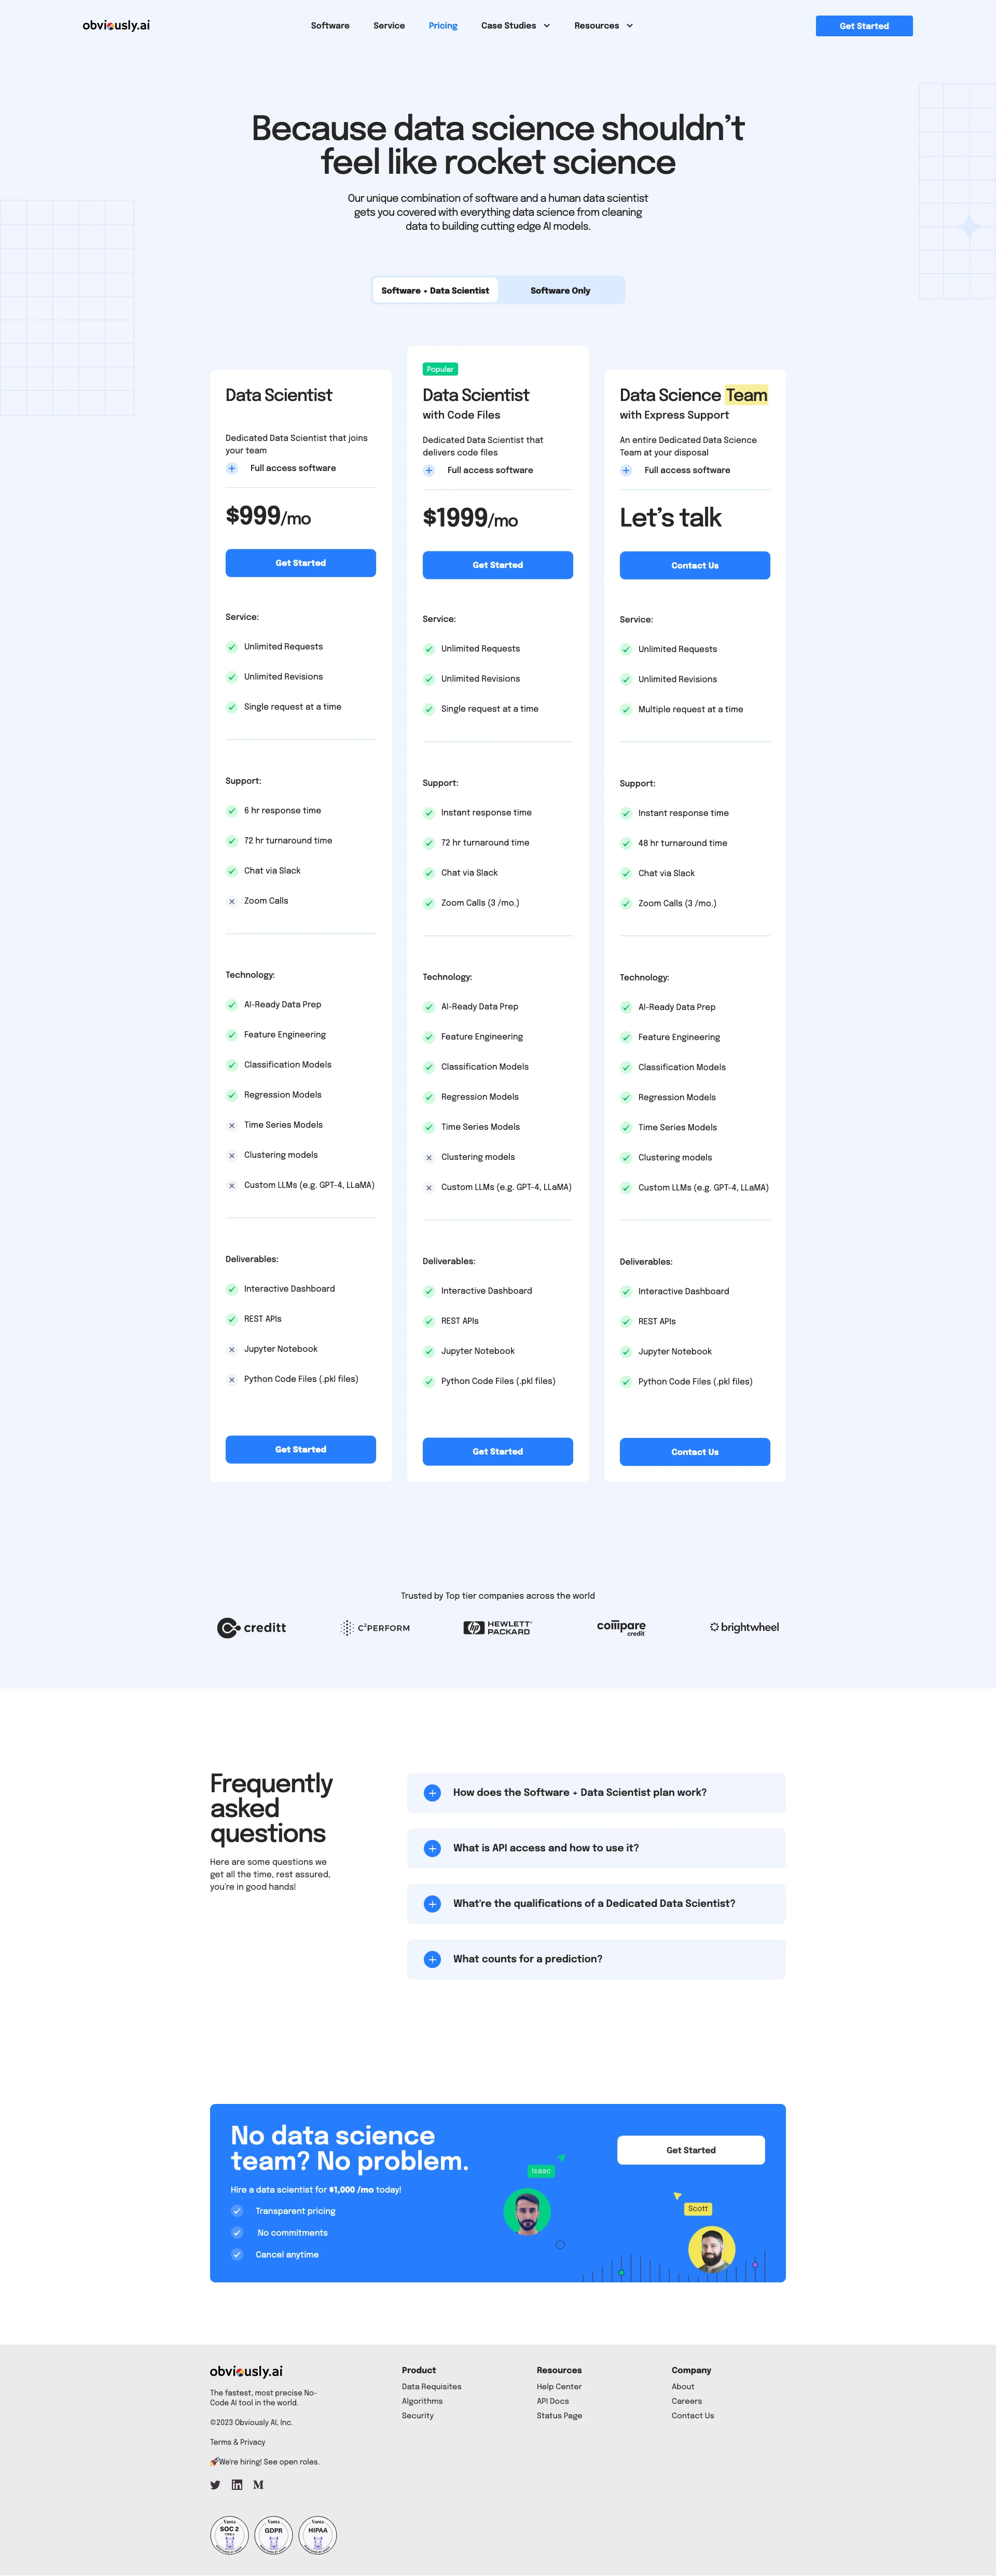 Obviously AI Landing Page Example: The fastest, most precise no-code AI tool ever. Turn AI into ROI by going from raw data to industry leading predictive models in minutes, not months.